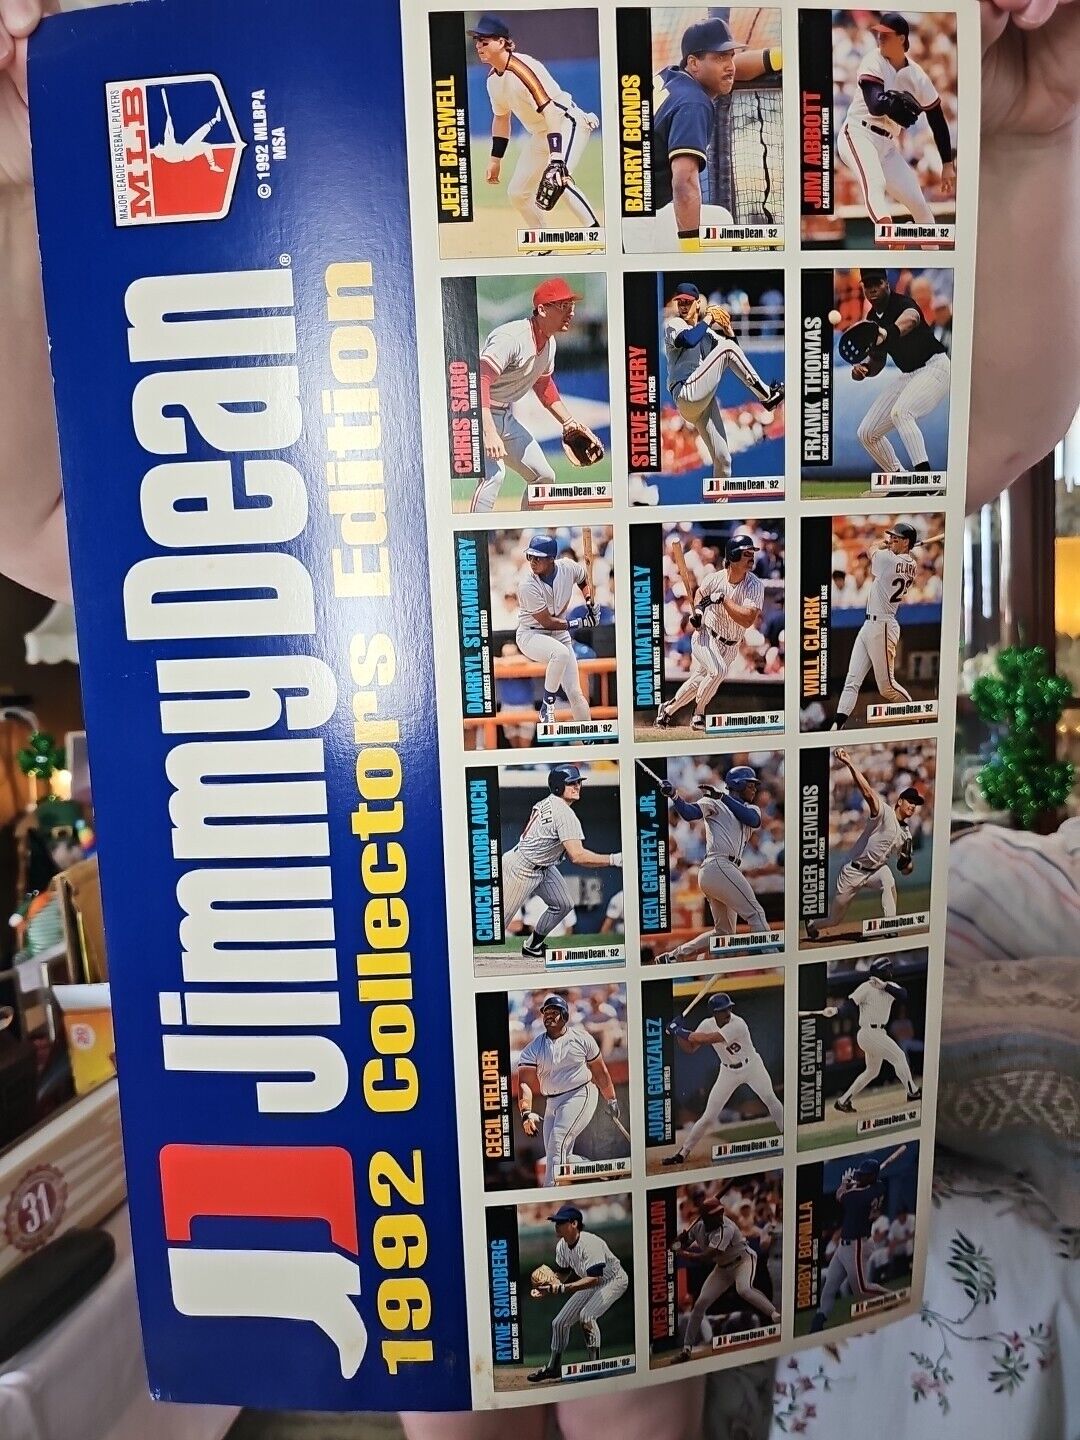 1992 JIMMY DEAN MLB COLLECTOR'S EDITION TRADING CARDS UNCUT SHEET OF 18 CARDS